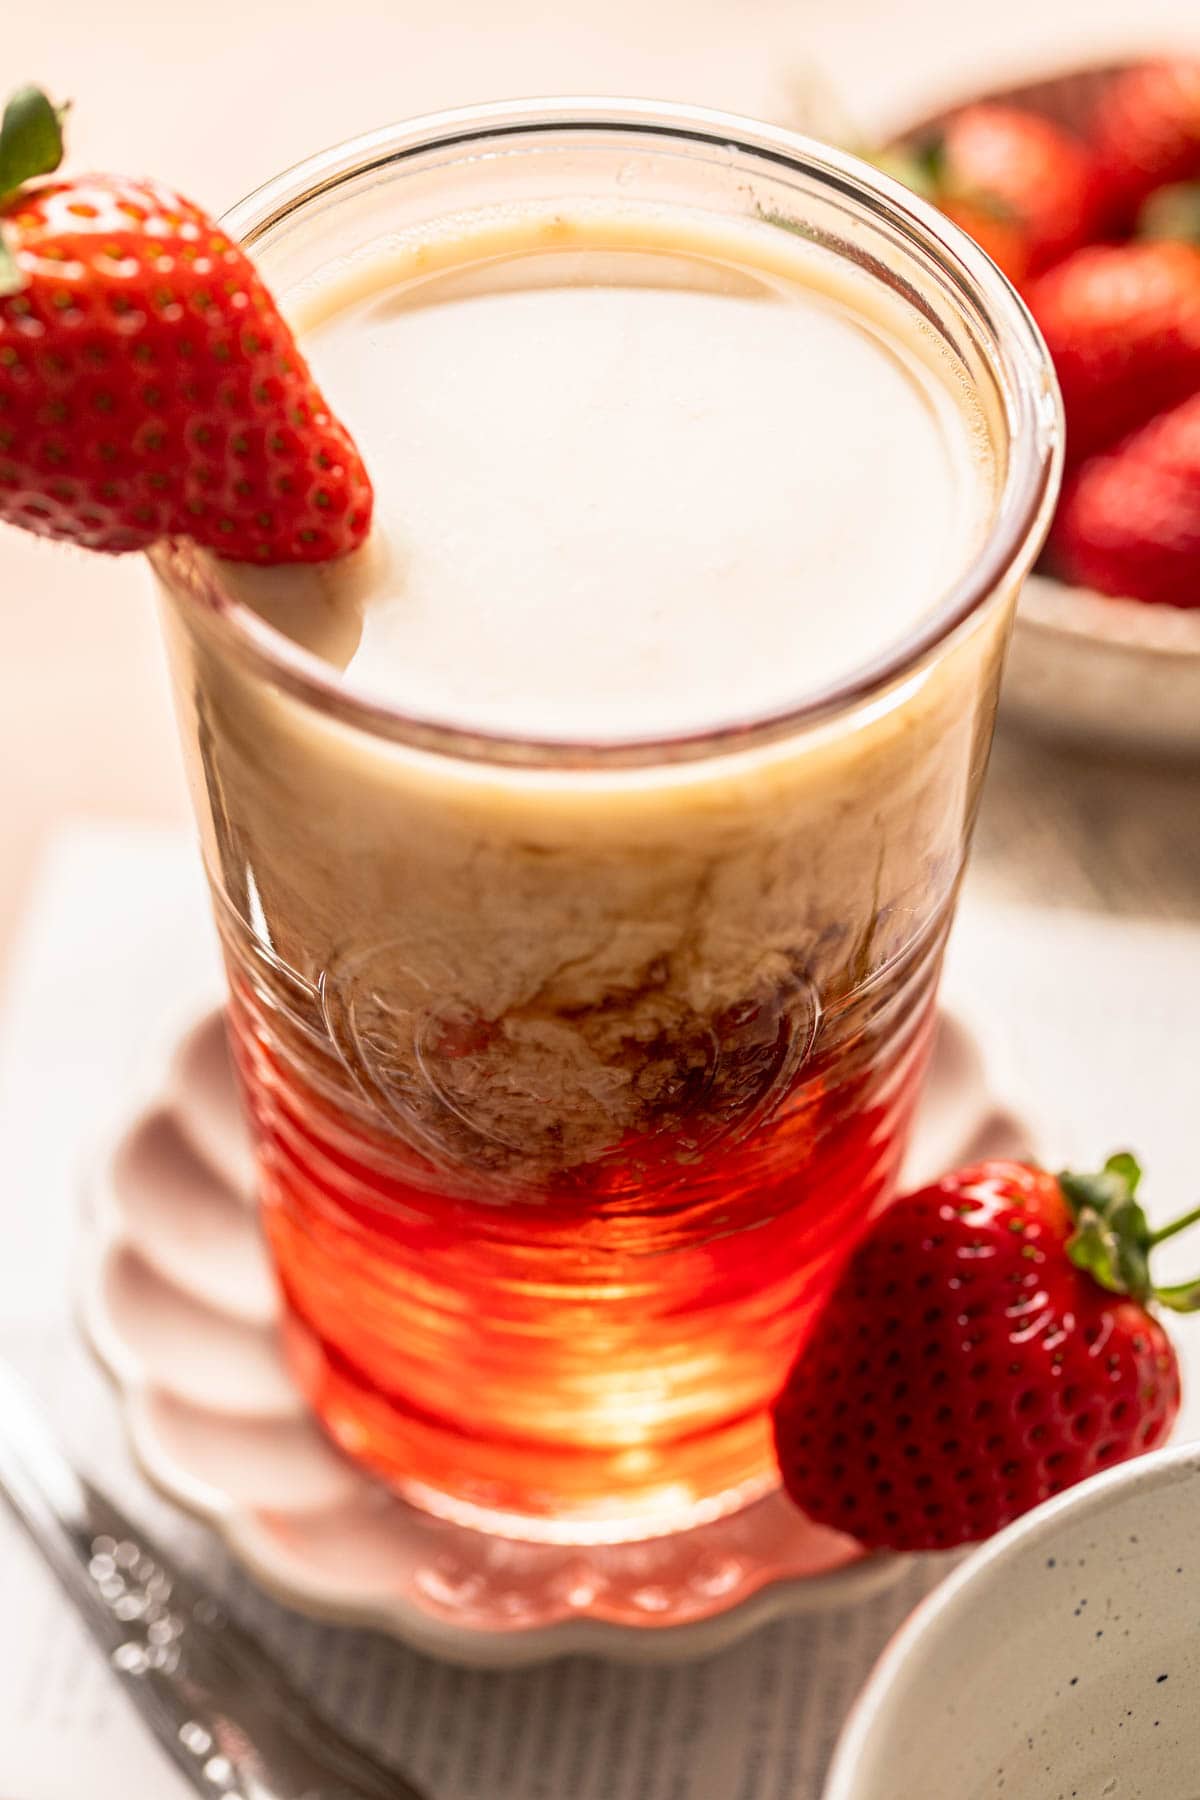 A side view of iced strawberry latte in a glass.